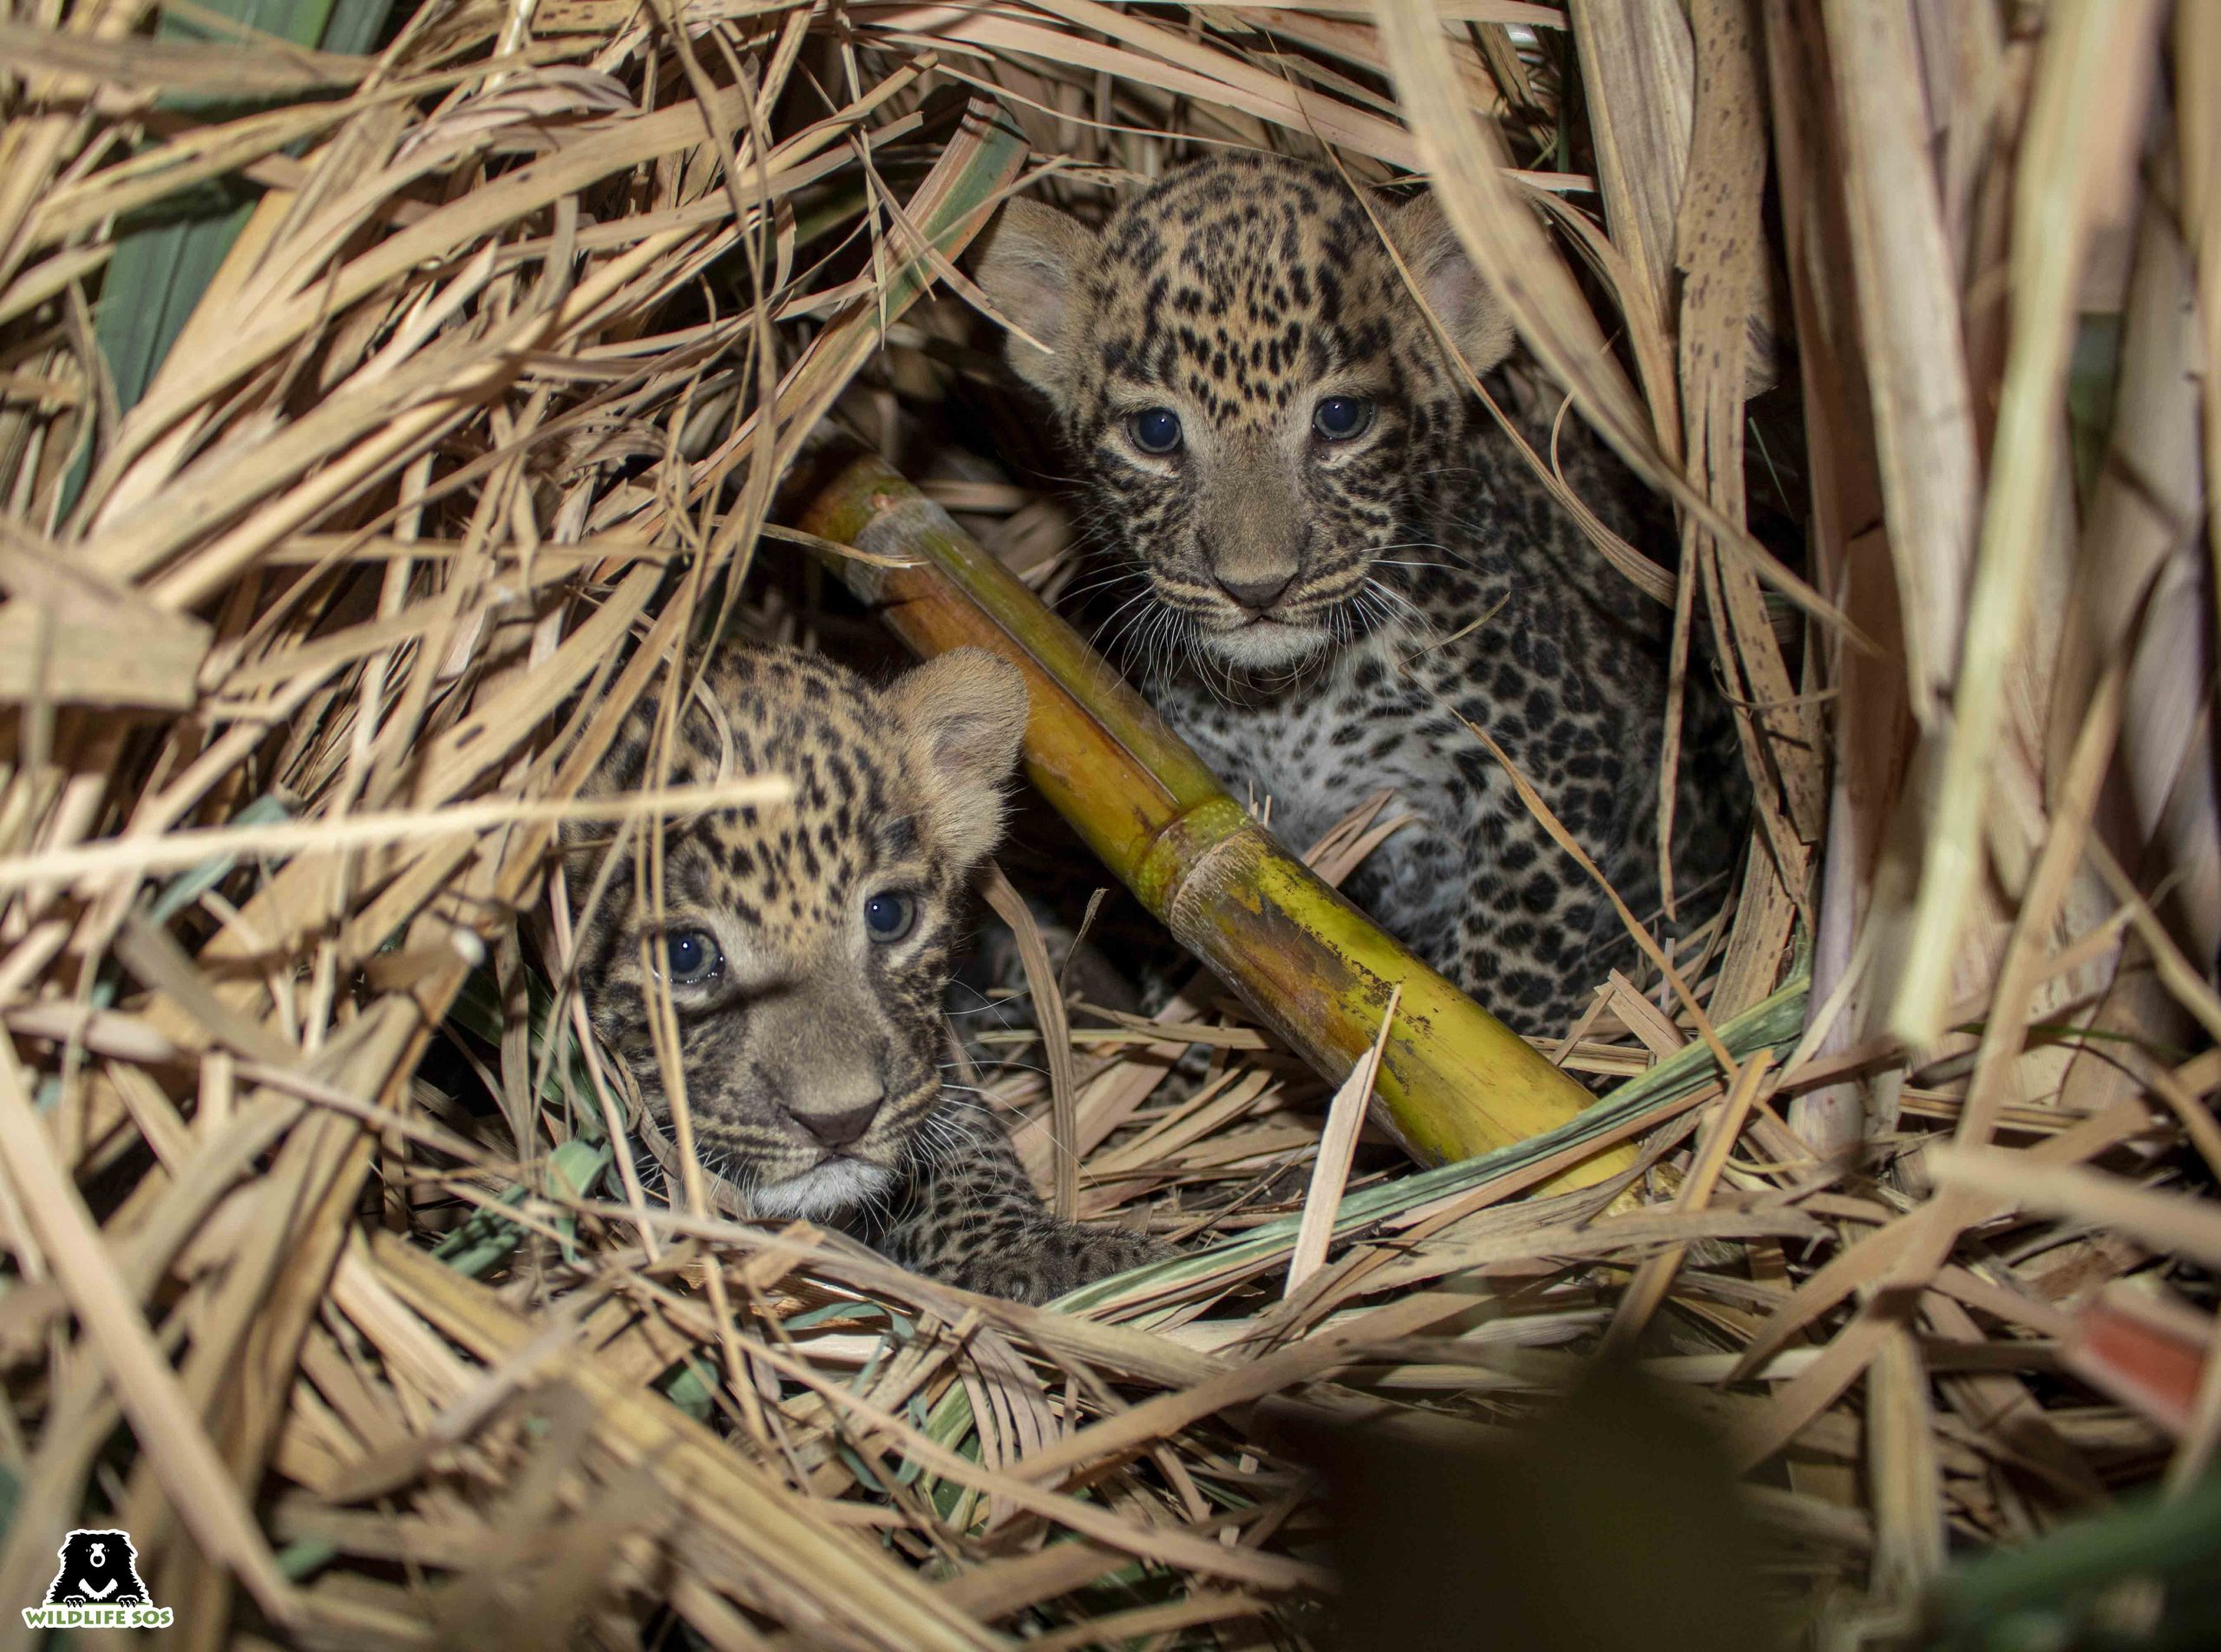 The two cubs were found in a sugarcane field in Otur Village (1)